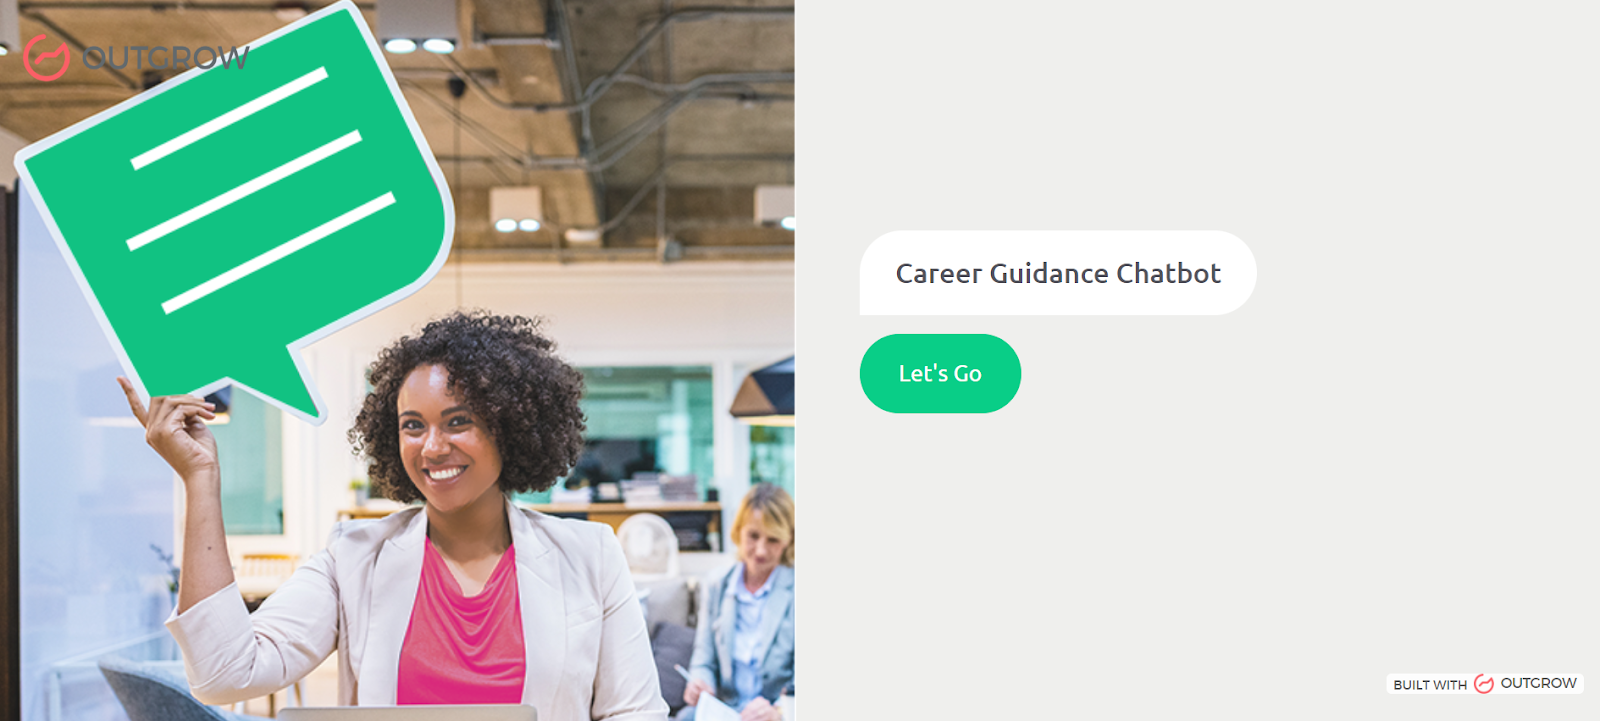 Outgrow's career guidance chatbot